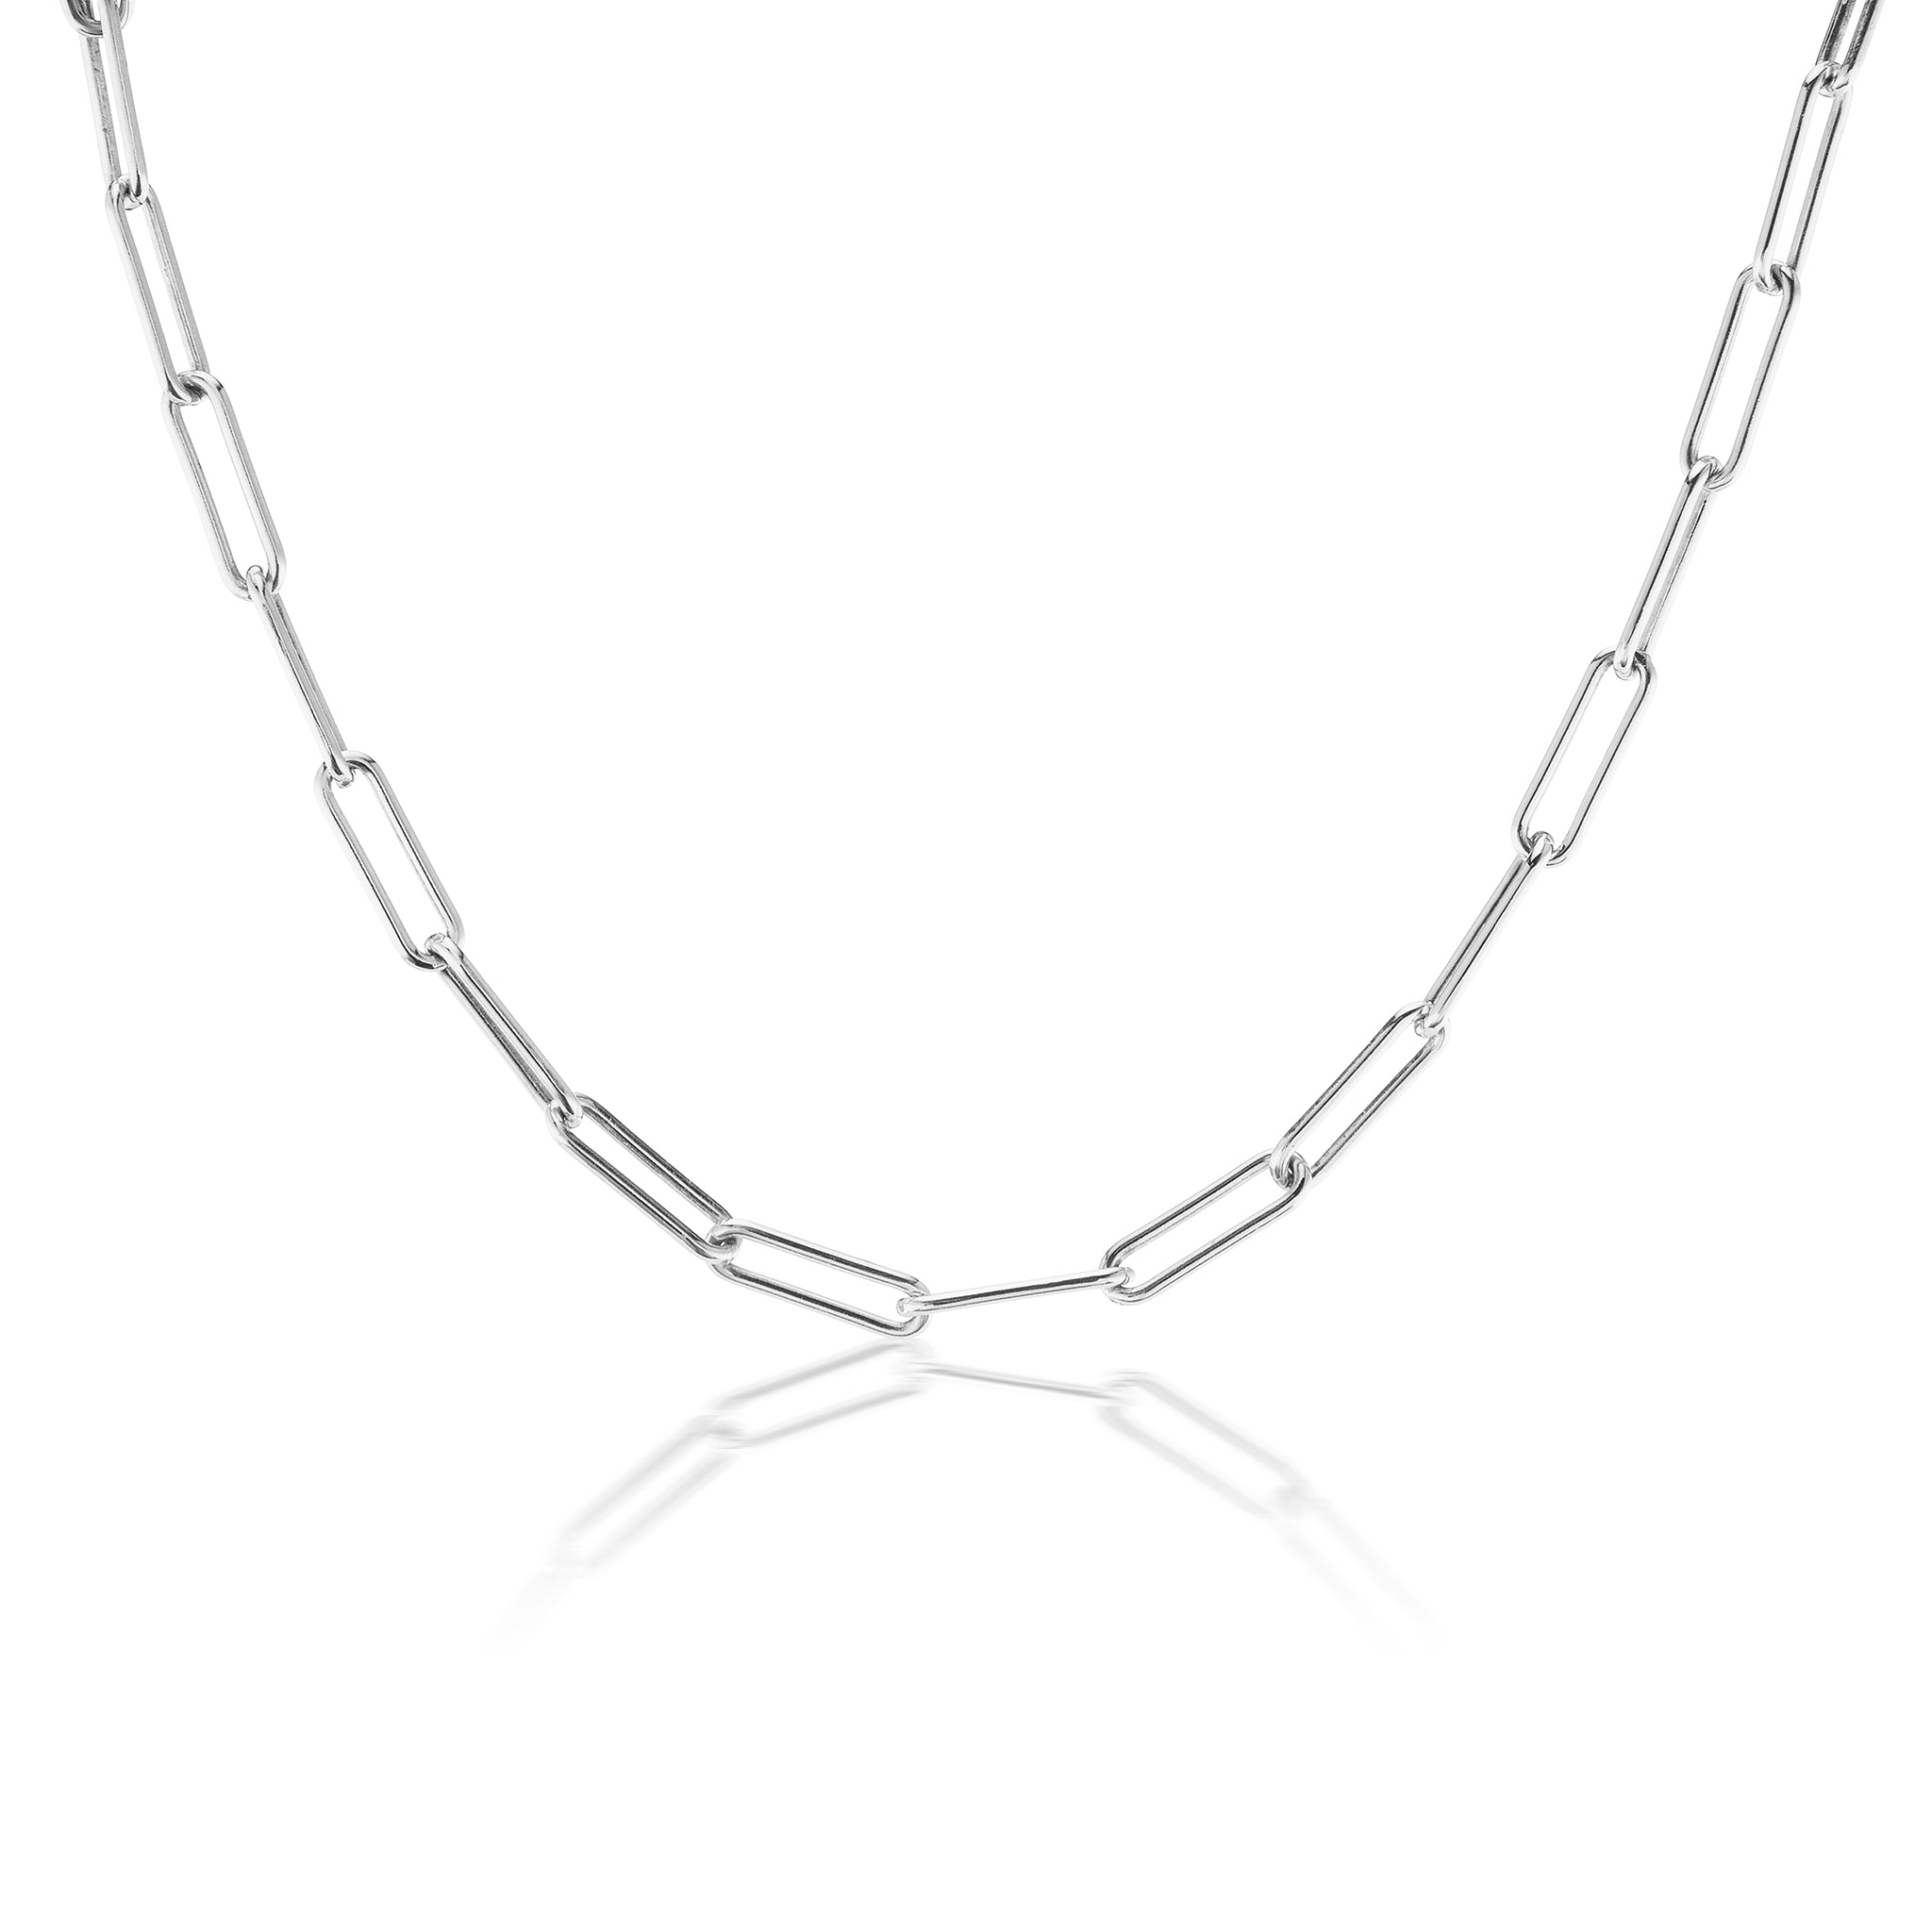 The Silver Soho Necklace